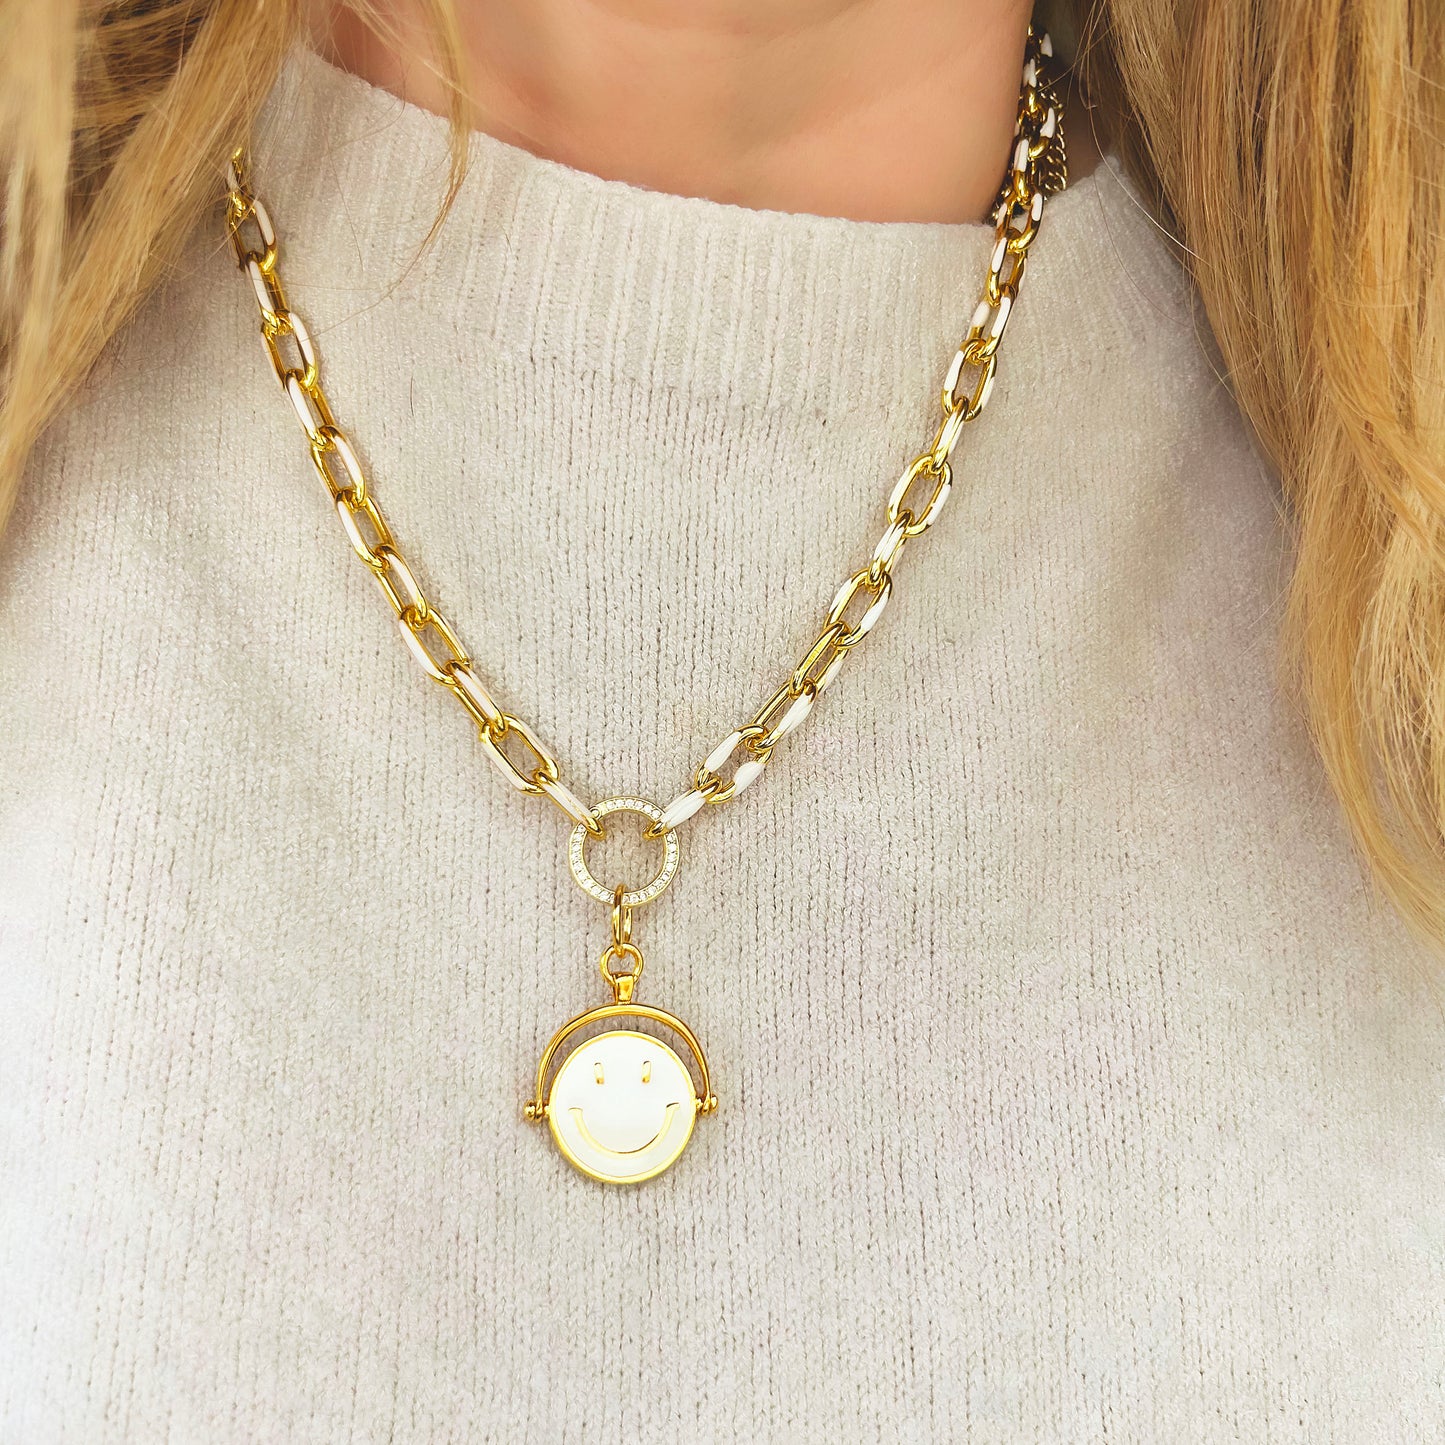 Smiley Face Necklace | Happy Sad Spinner